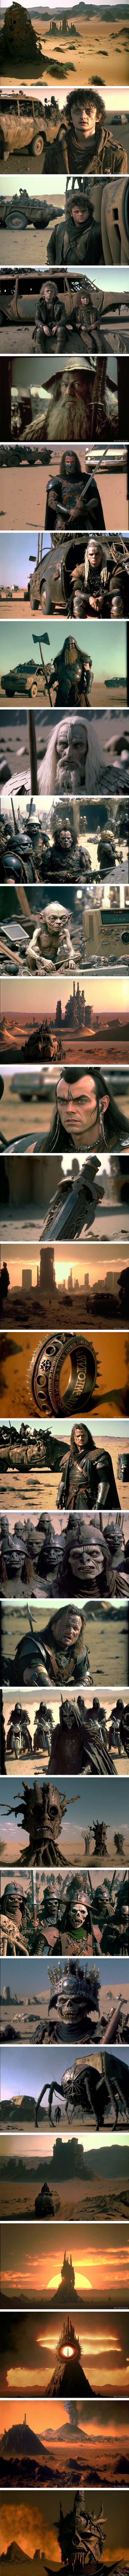 Mad Max of the Rings